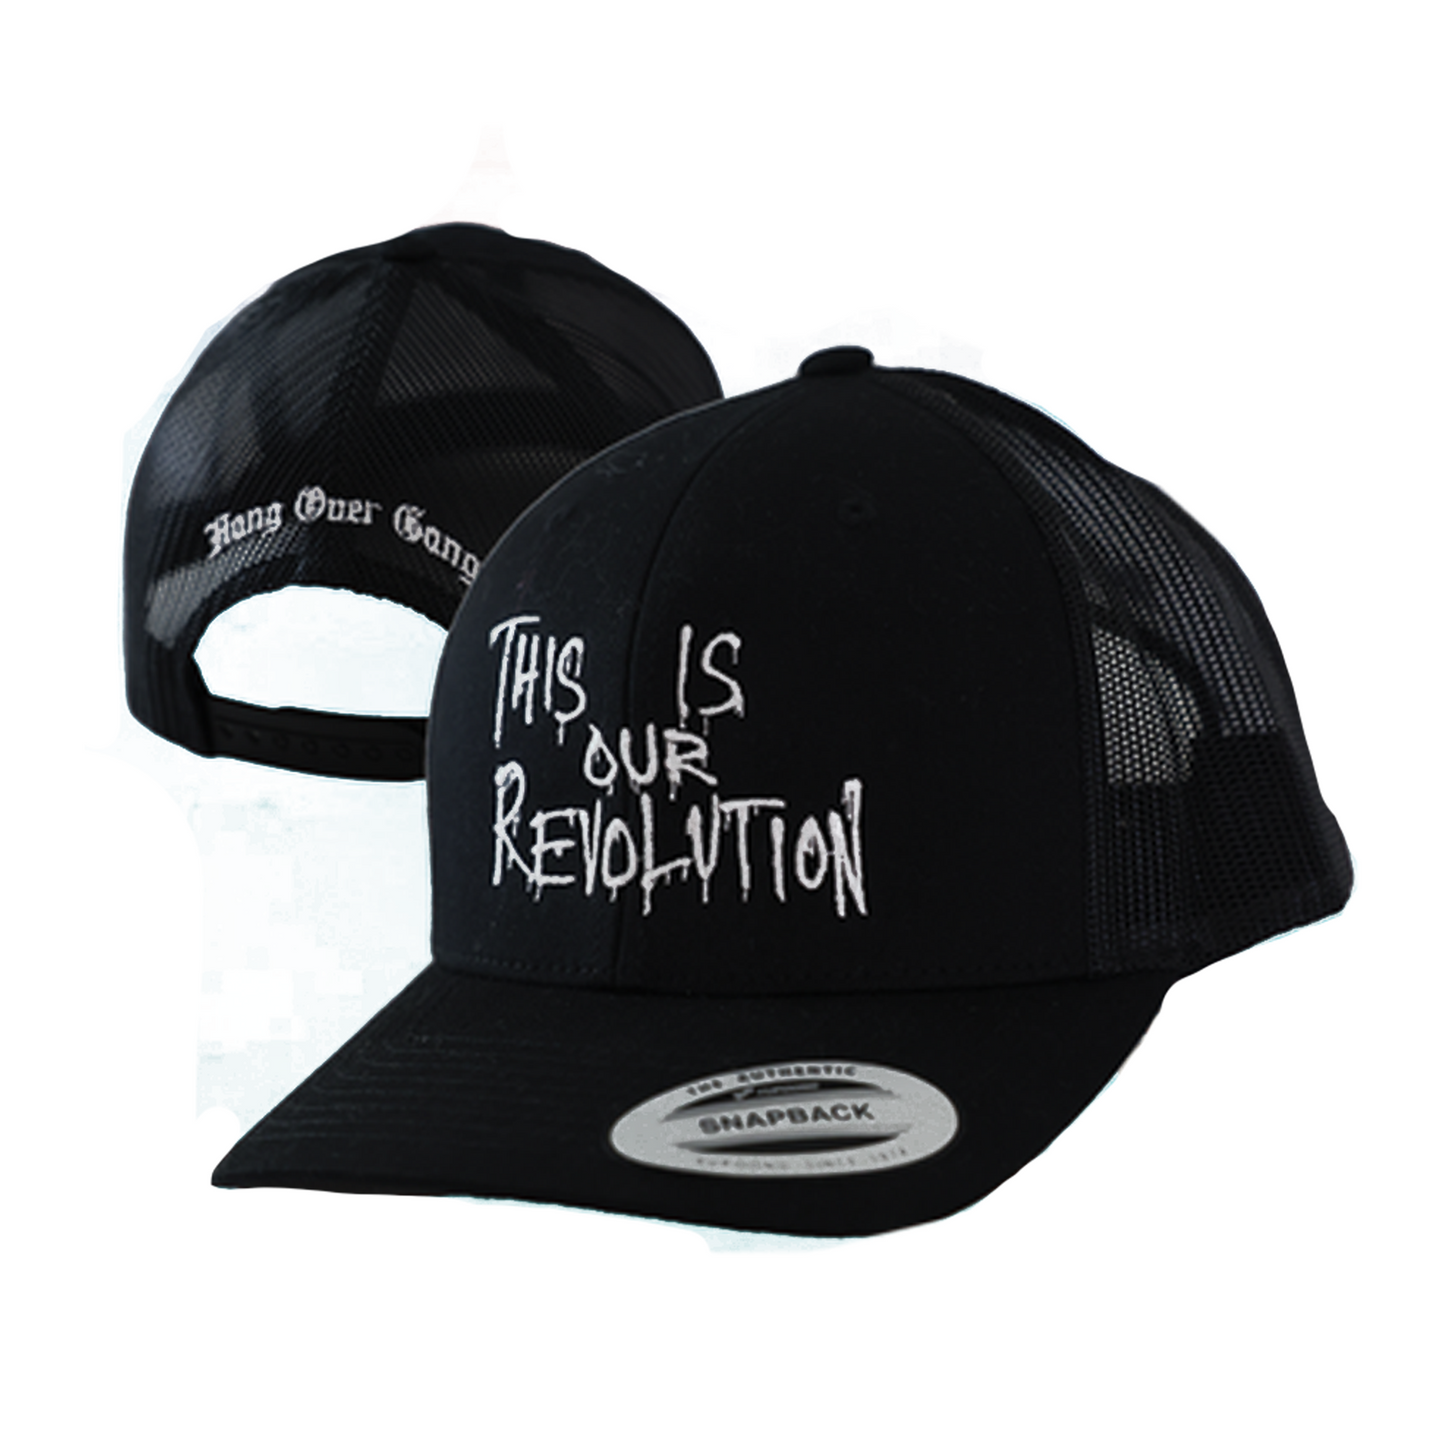 "This is our Revolution" Hat